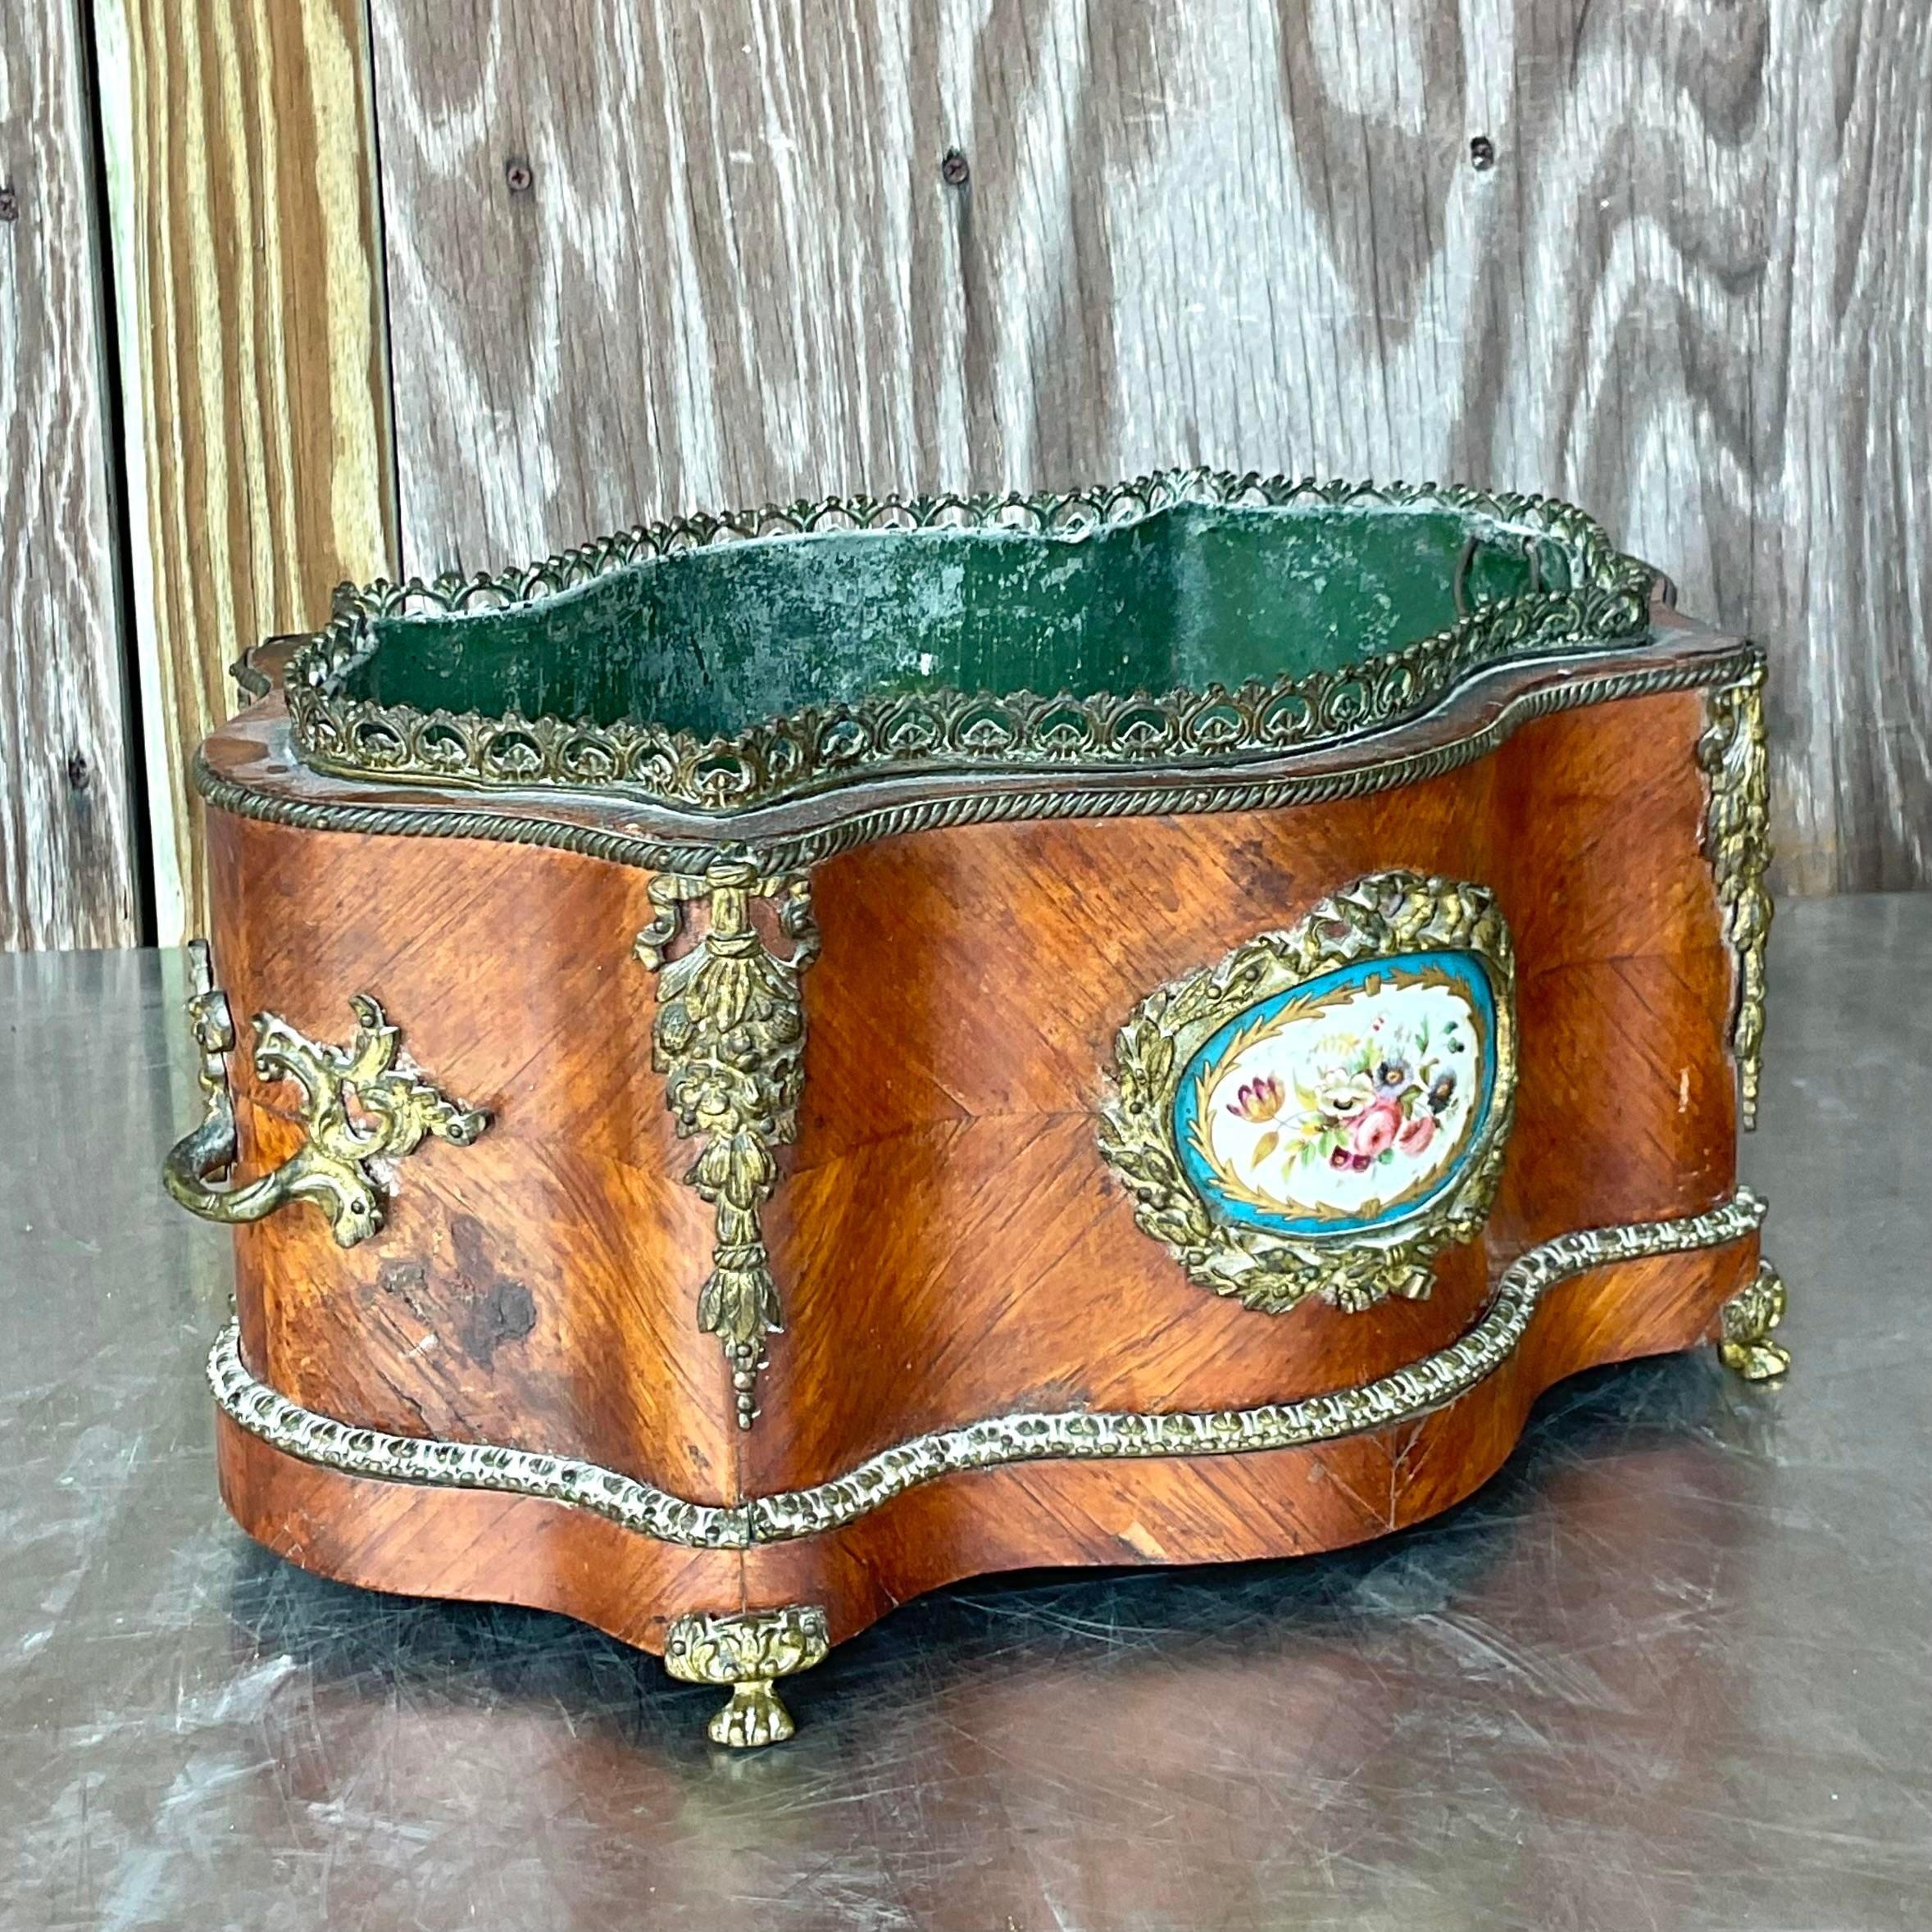 Capture the elegance of a bygone era with this Vintage 19th Century Regency Ormolu and Porcelain Planter. Infused with American style and refined craftsmanship, it's a timeless accent piece that adds sophistication and charm to any living space,